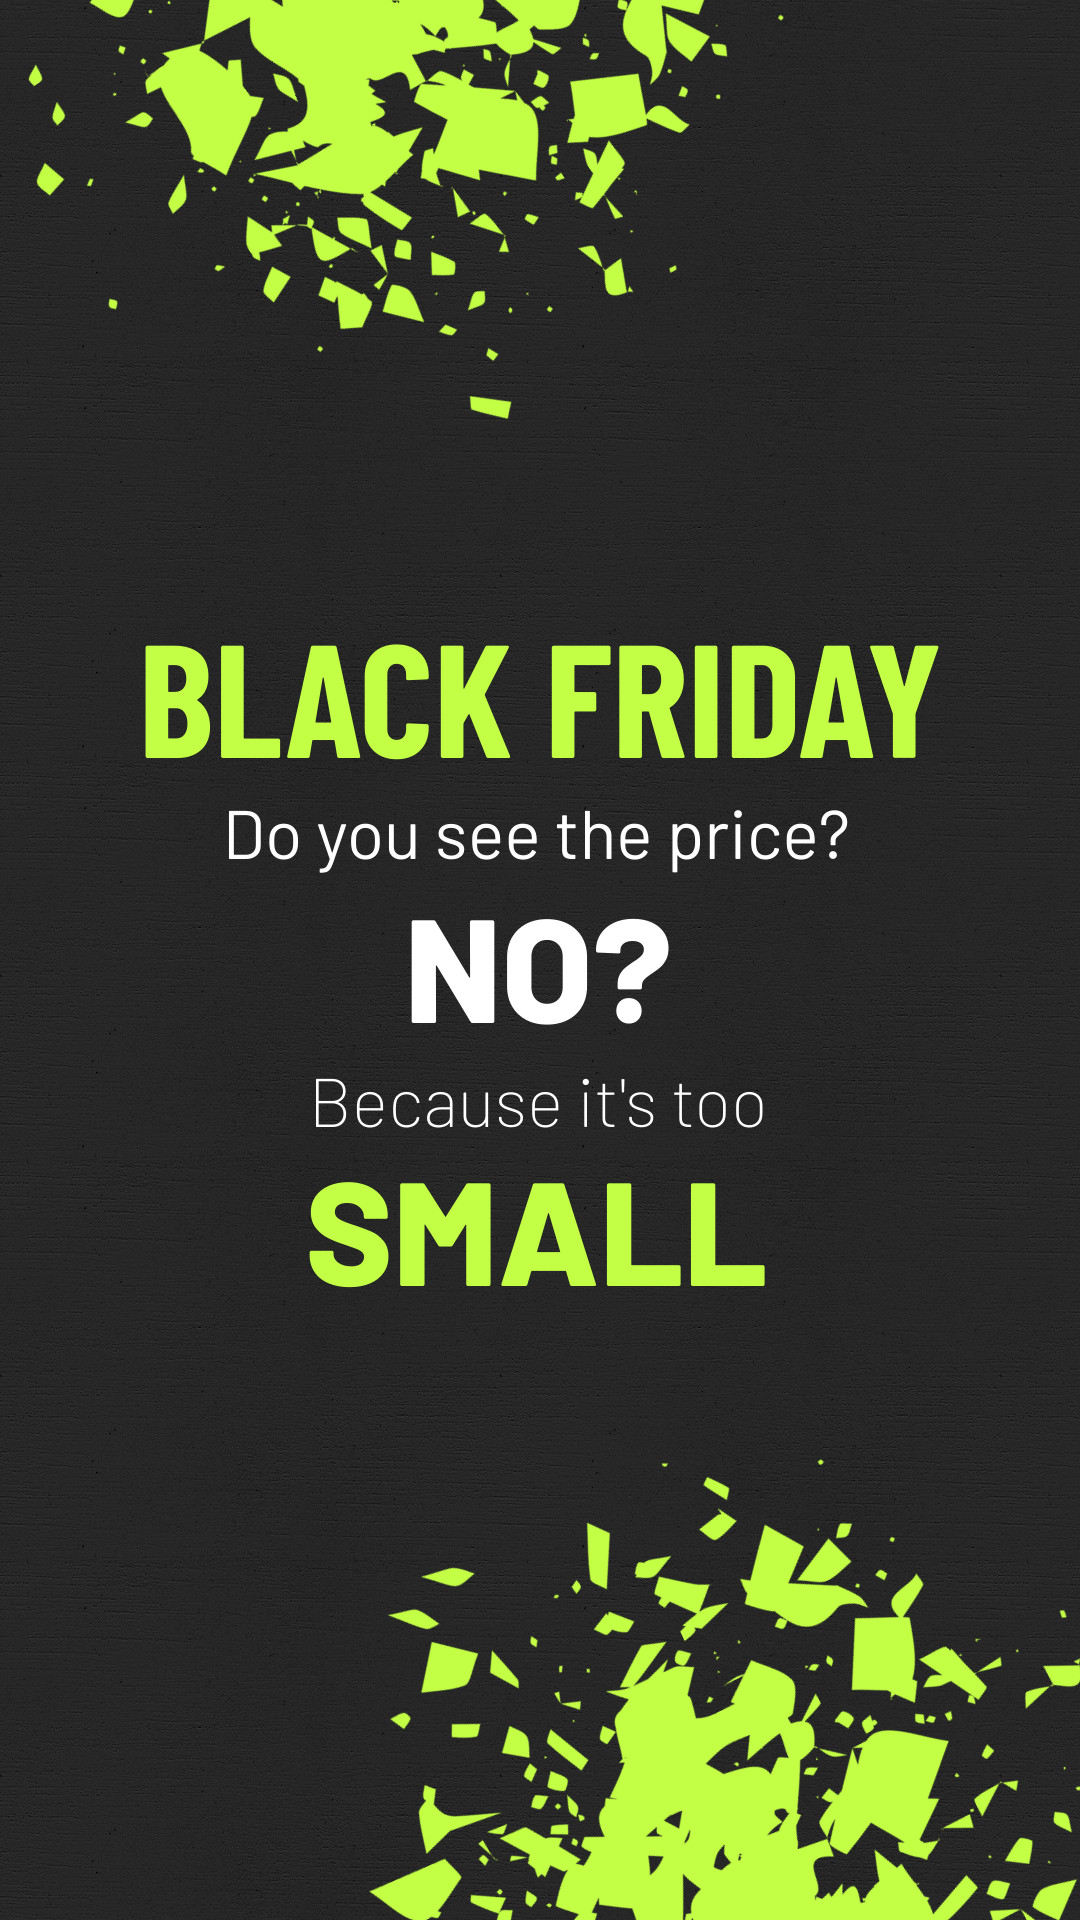 Black Friday Too Small Price Inline Rectangle 300x250